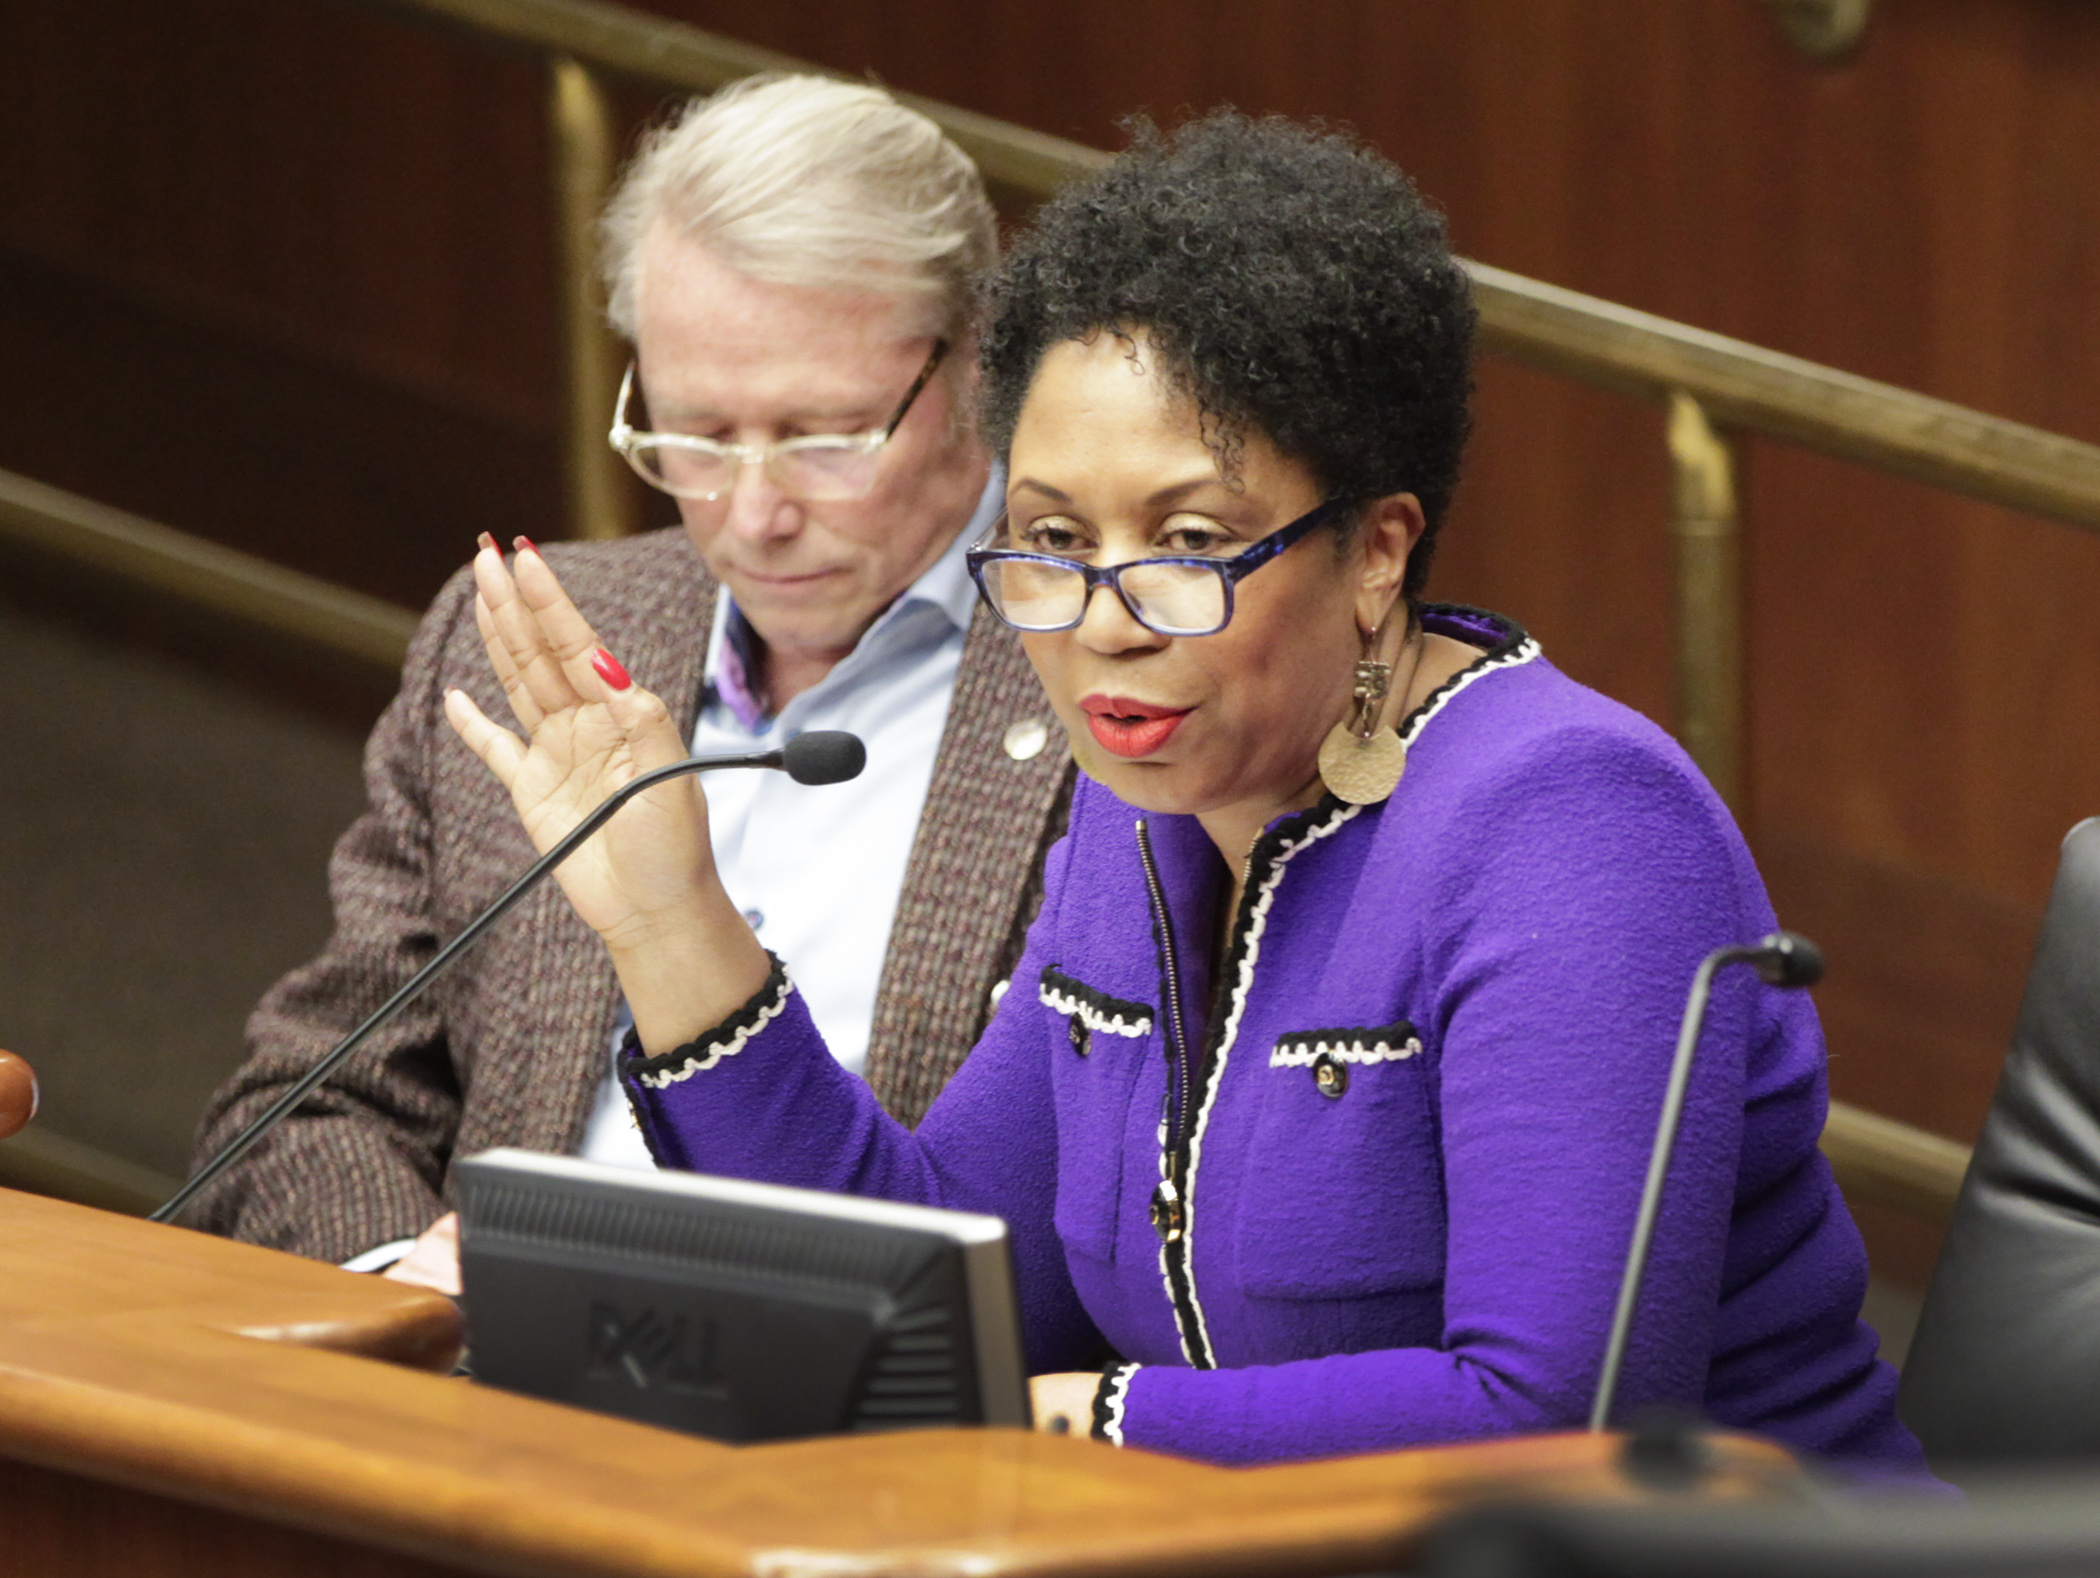 Sharon Smith-Akinsanya testifies in the House Legacy Finance Division in support of HF2360, sponsored by Rep. Raymond Dehn, left, which would appropriate $250,000 for a mural in Downtown Minneapolis honoring the life of Prince. Photo by Paul Battaglia